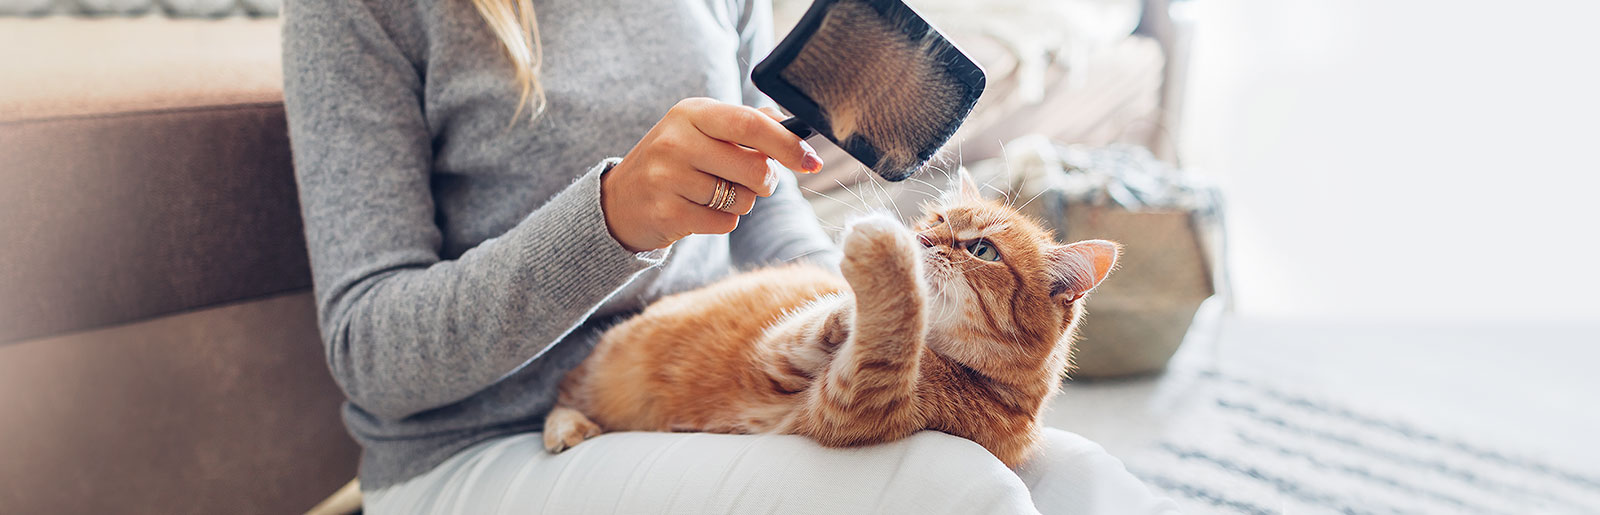 Coat care for cats: For a shiny and healthy cat coat